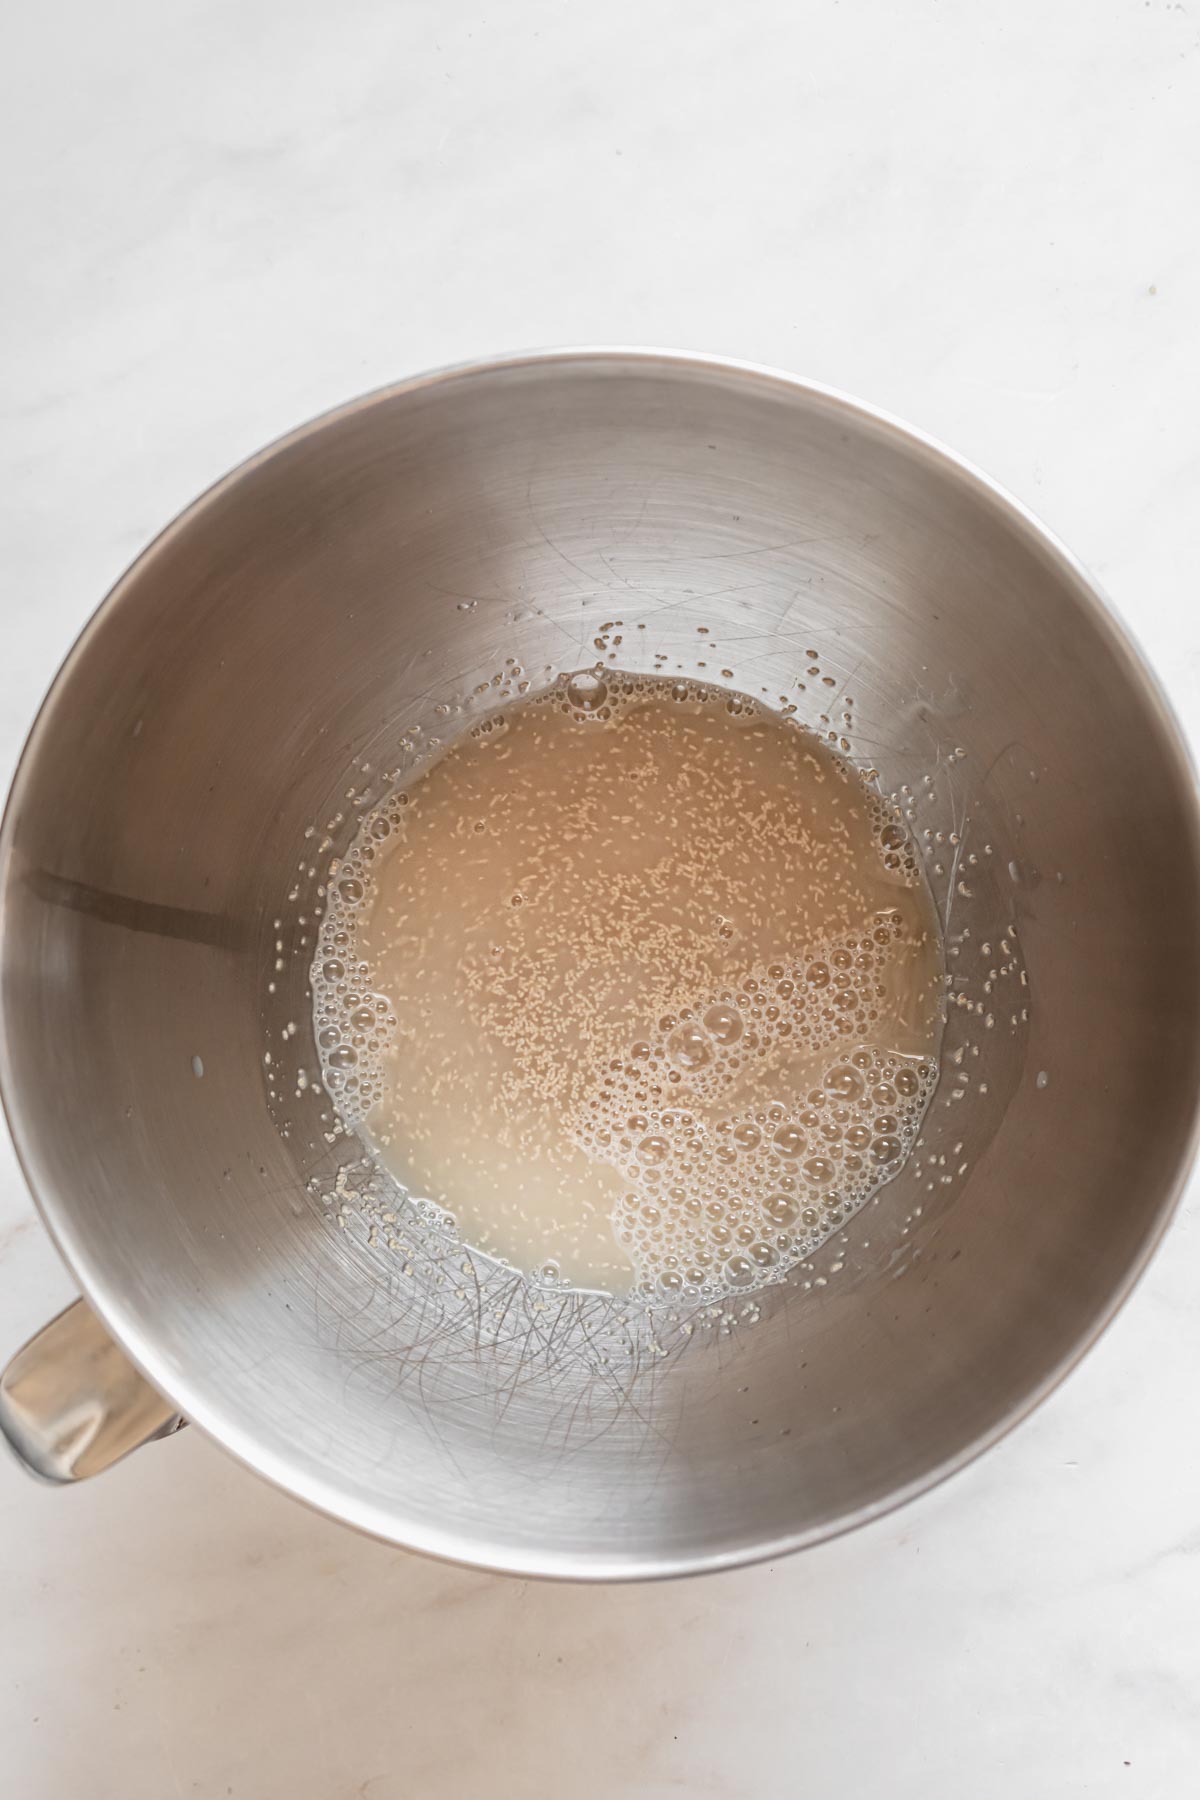 Yeast water and sugar mixed together in a bowl.